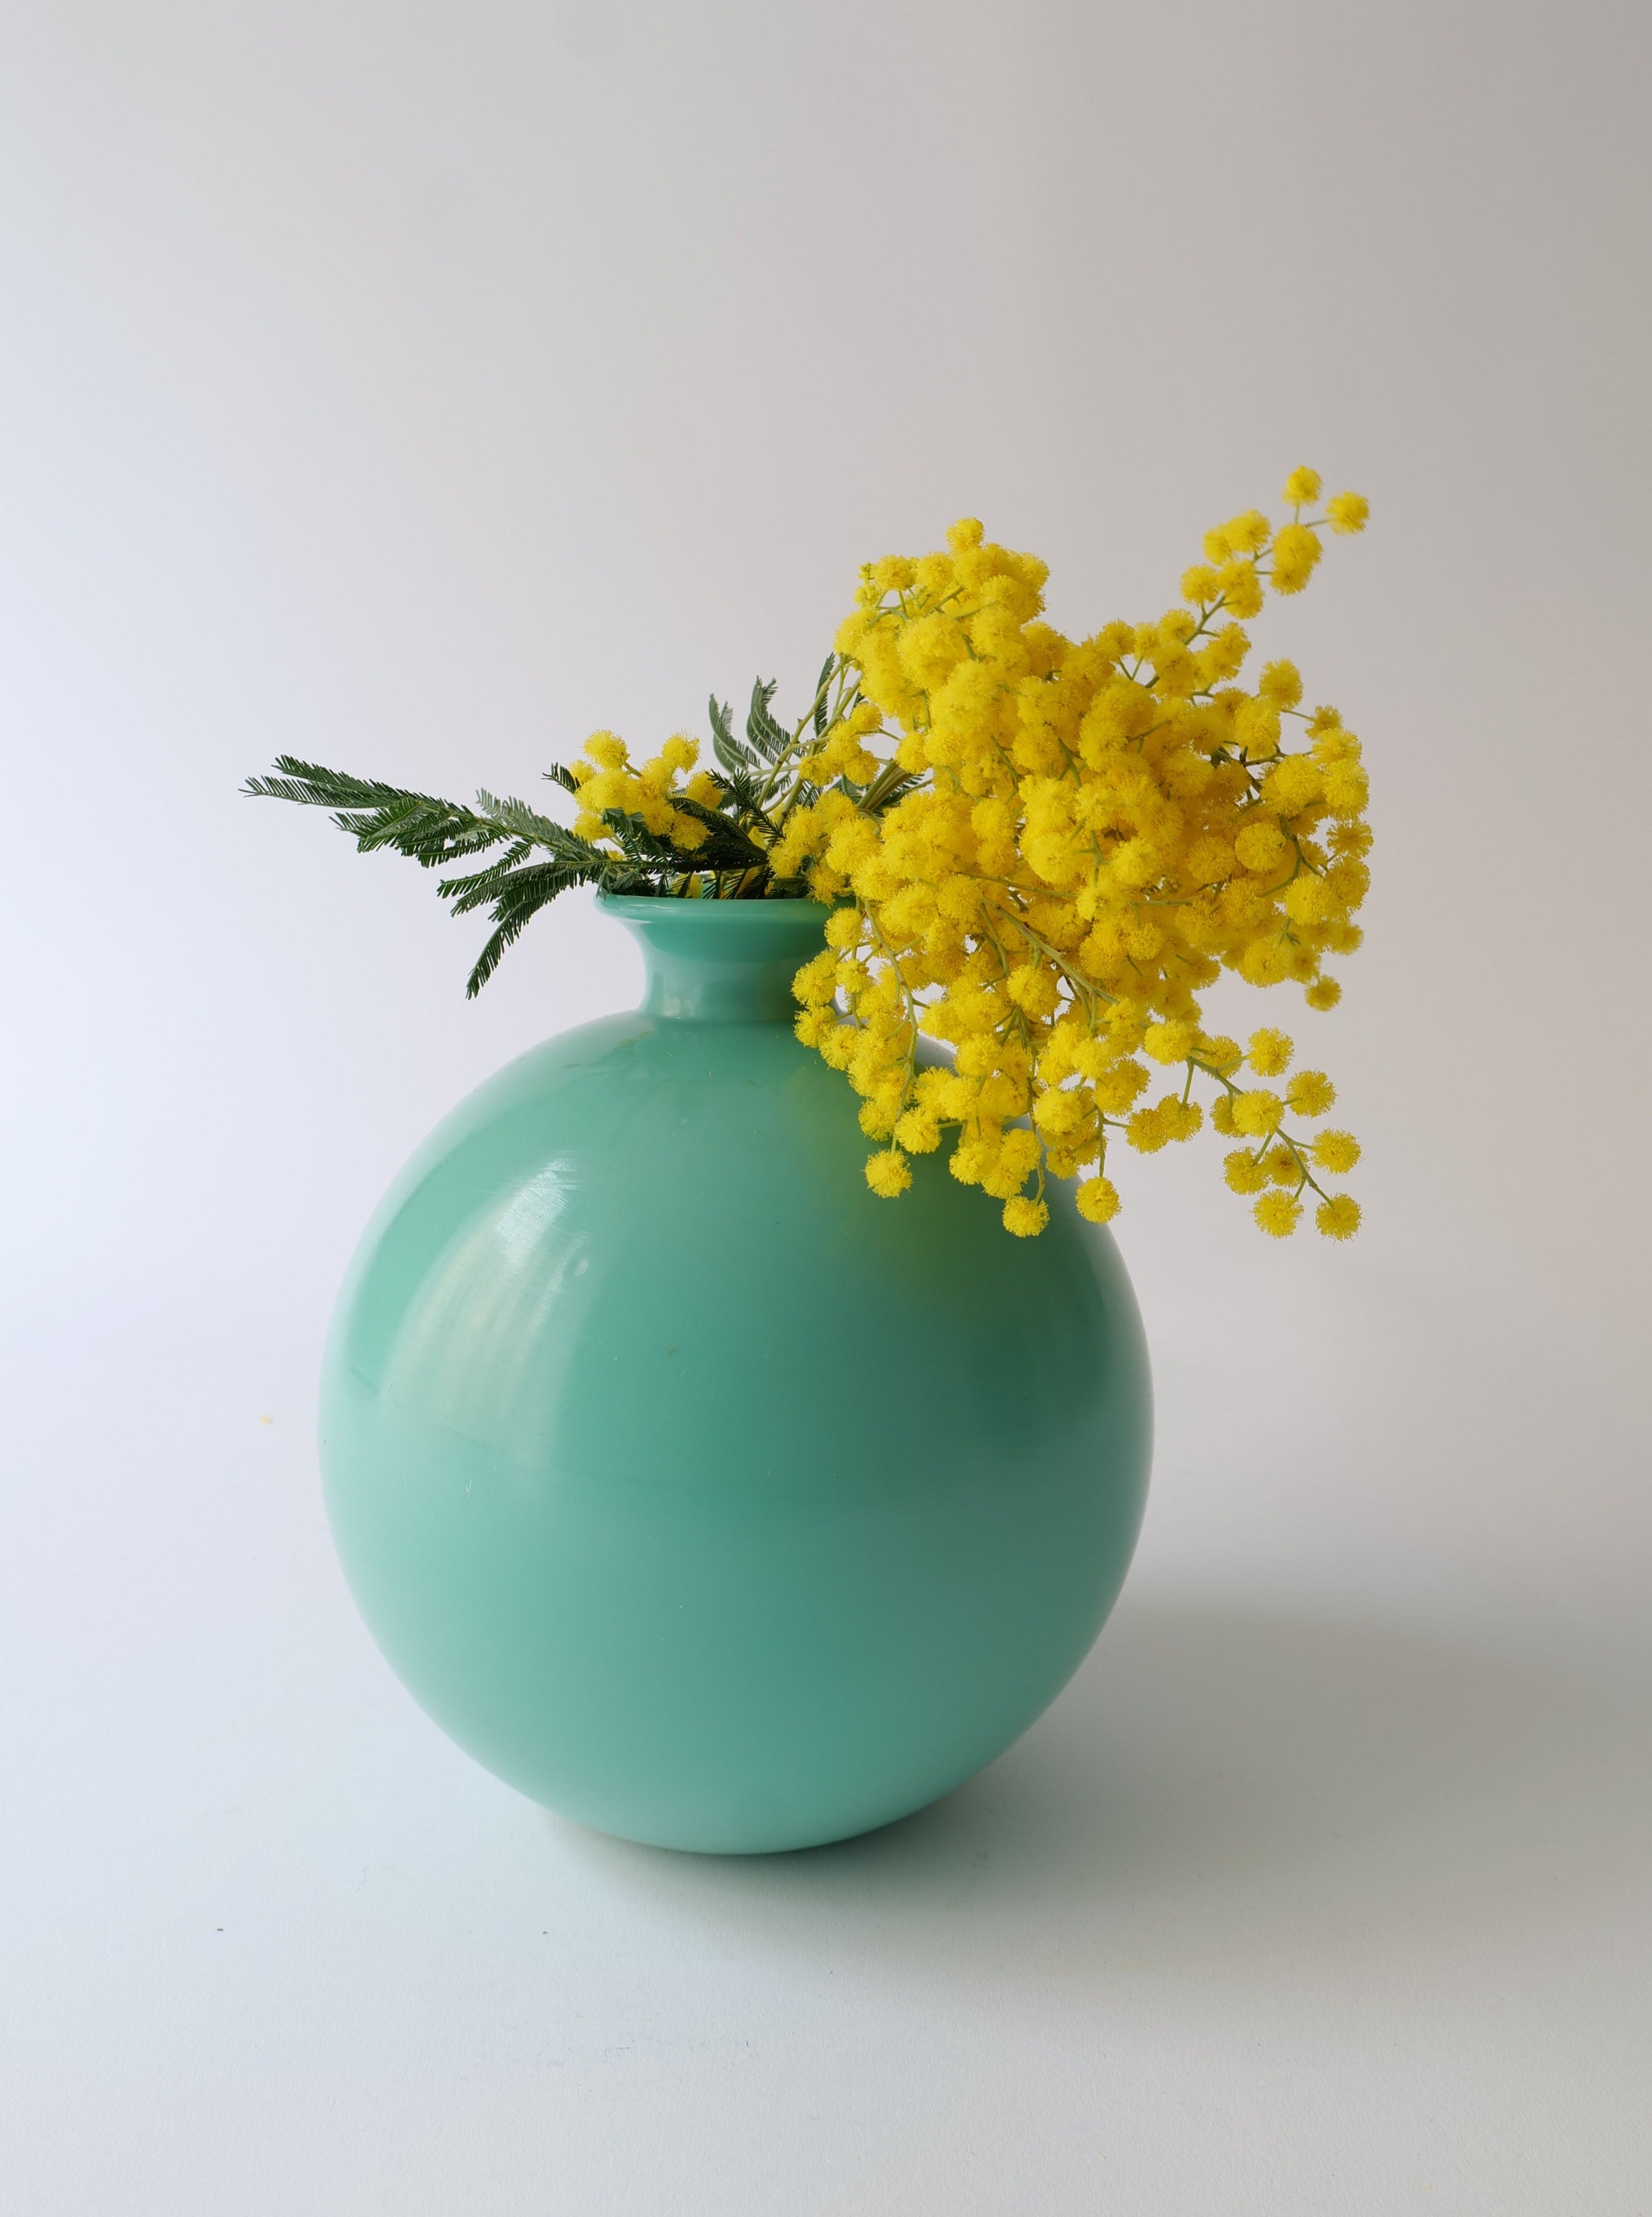 Vintage Flowerball Vase designed by Harald Notini in 1930, showcasing a spherical shape with delicate floral patterns, perfect for displaying fresh blooms in a timeless and elegant manner